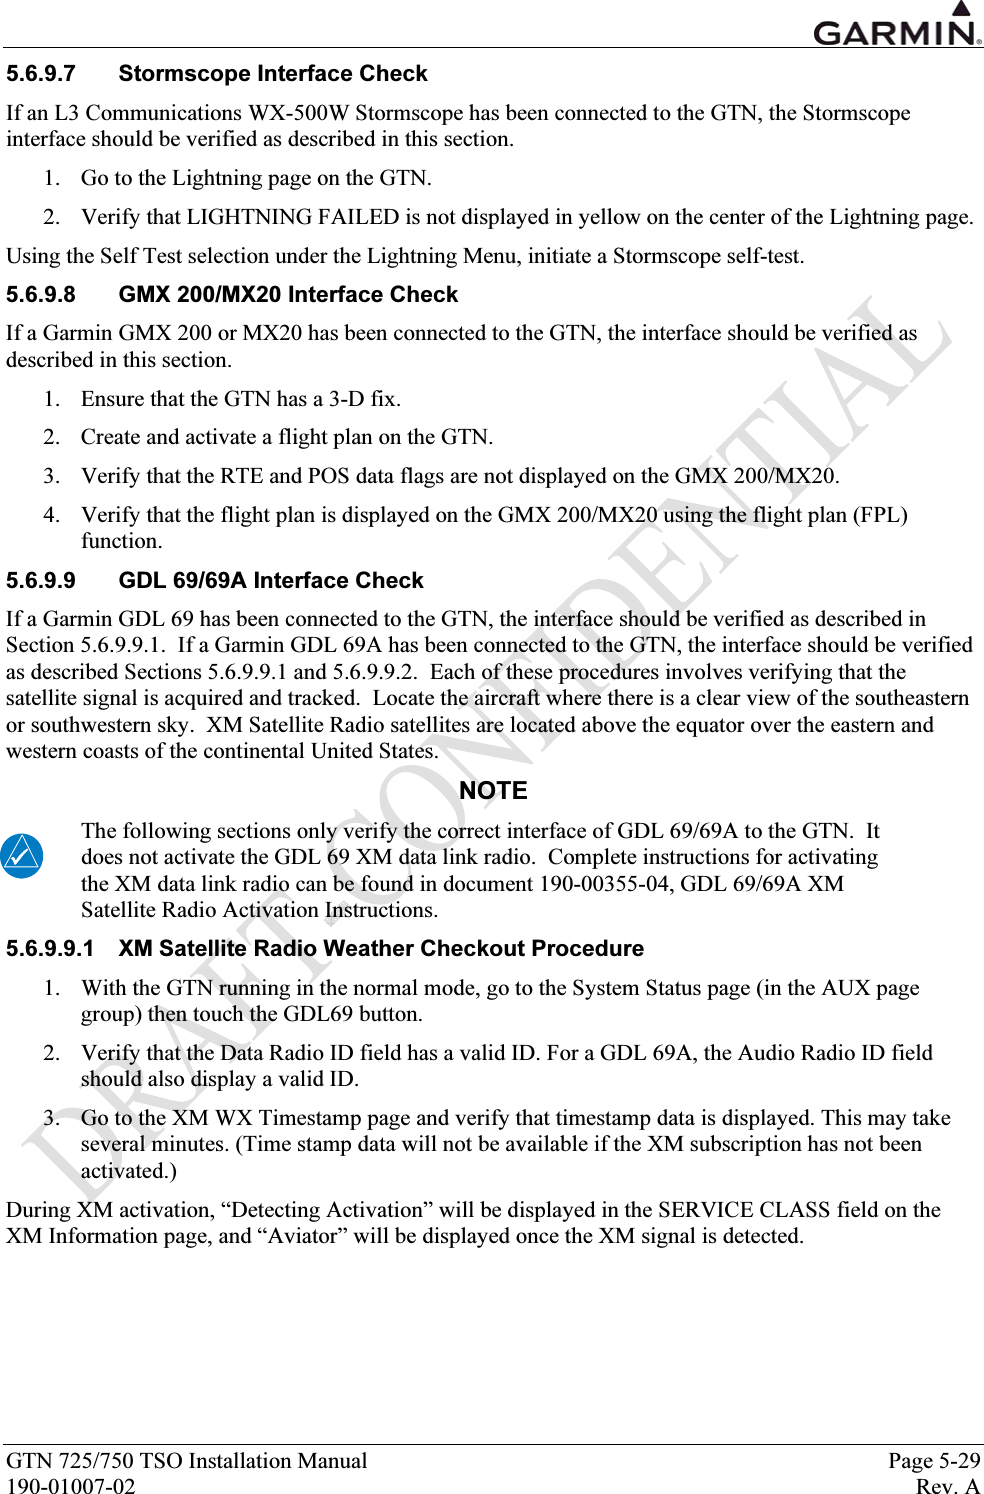  GTN 725/750 TSO Installation Manual  Page 5-29 190-01007-02  Rev. A 5.6.9.7  Stormscope Interface Check If an L3 Communications WX-500W Stormscope has been connected to the GTN, the Stormscope interface should be verified as described in this section. 1. Go to the Lightning page on the GTN. 2. Verify that LIGHTNING FAILED is not displayed in yellow on the center of the Lightning page. Using the Self Test selection under the Lightning Menu, initiate a Stormscope self-test. 5.6.9.8  GMX 200/MX20 Interface Check If a Garmin GMX 200 or MX20 has been connected to the GTN, the interface should be verified as described in this section. 1. Ensure that the GTN has a 3-D fix. 2. Create and activate a flight plan on the GTN. 3. Verify that the RTE and POS data flags are not displayed on the GMX 200/MX20. 4. Verify that the flight plan is displayed on the GMX 200/MX20 using the flight plan (FPL) function. 5.6.9.9  GDL 69/69A Interface Check If a Garmin GDL 69 has been connected to the GTN, the interface should be verified as described in Section 5.6.9.9.1.  If a Garmin GDL 69A has been connected to the GTN, the interface should be verified as described Sections 5.6.9.9.1 and 5.6.9.9.2.  Each of these procedures involves verifying that the satellite signal is acquired and tracked.  Locate the aircraft where there is a clear view of the southeastern or southwestern sky.  XM Satellite Radio satellites are located above the equator over the eastern and western coasts of the continental United States. NOTE The following sections only verify the correct interface of GDL 69/69A to the GTN.  It does not activate the GDL 69 XM data link radio.  Complete instructions for activating the XM data link radio can be found in document 190-00355-04, GDL 69/69A XM Satellite Radio Activation Instructions. 5.6.9.9.1  XM Satellite Radio Weather Checkout Procedure 1. With the GTN running in the normal mode, go to the System Status page (in the AUX page group) then touch the GDL69 button. 2. Verify that the Data Radio ID field has a valid ID. For a GDL 69A, the Audio Radio ID field should also display a valid ID. 3. Go to the XM WX Timestamp page and verify that timestamp data is displayed. This may take several minutes. (Time stamp data will not be available if the XM subscription has not been activated.) During XM activation, “Detecting Activation” will be displayed in the SERVICE CLASS field on the XM Information page, and “Aviator” will be displayed once the XM signal is detected. 